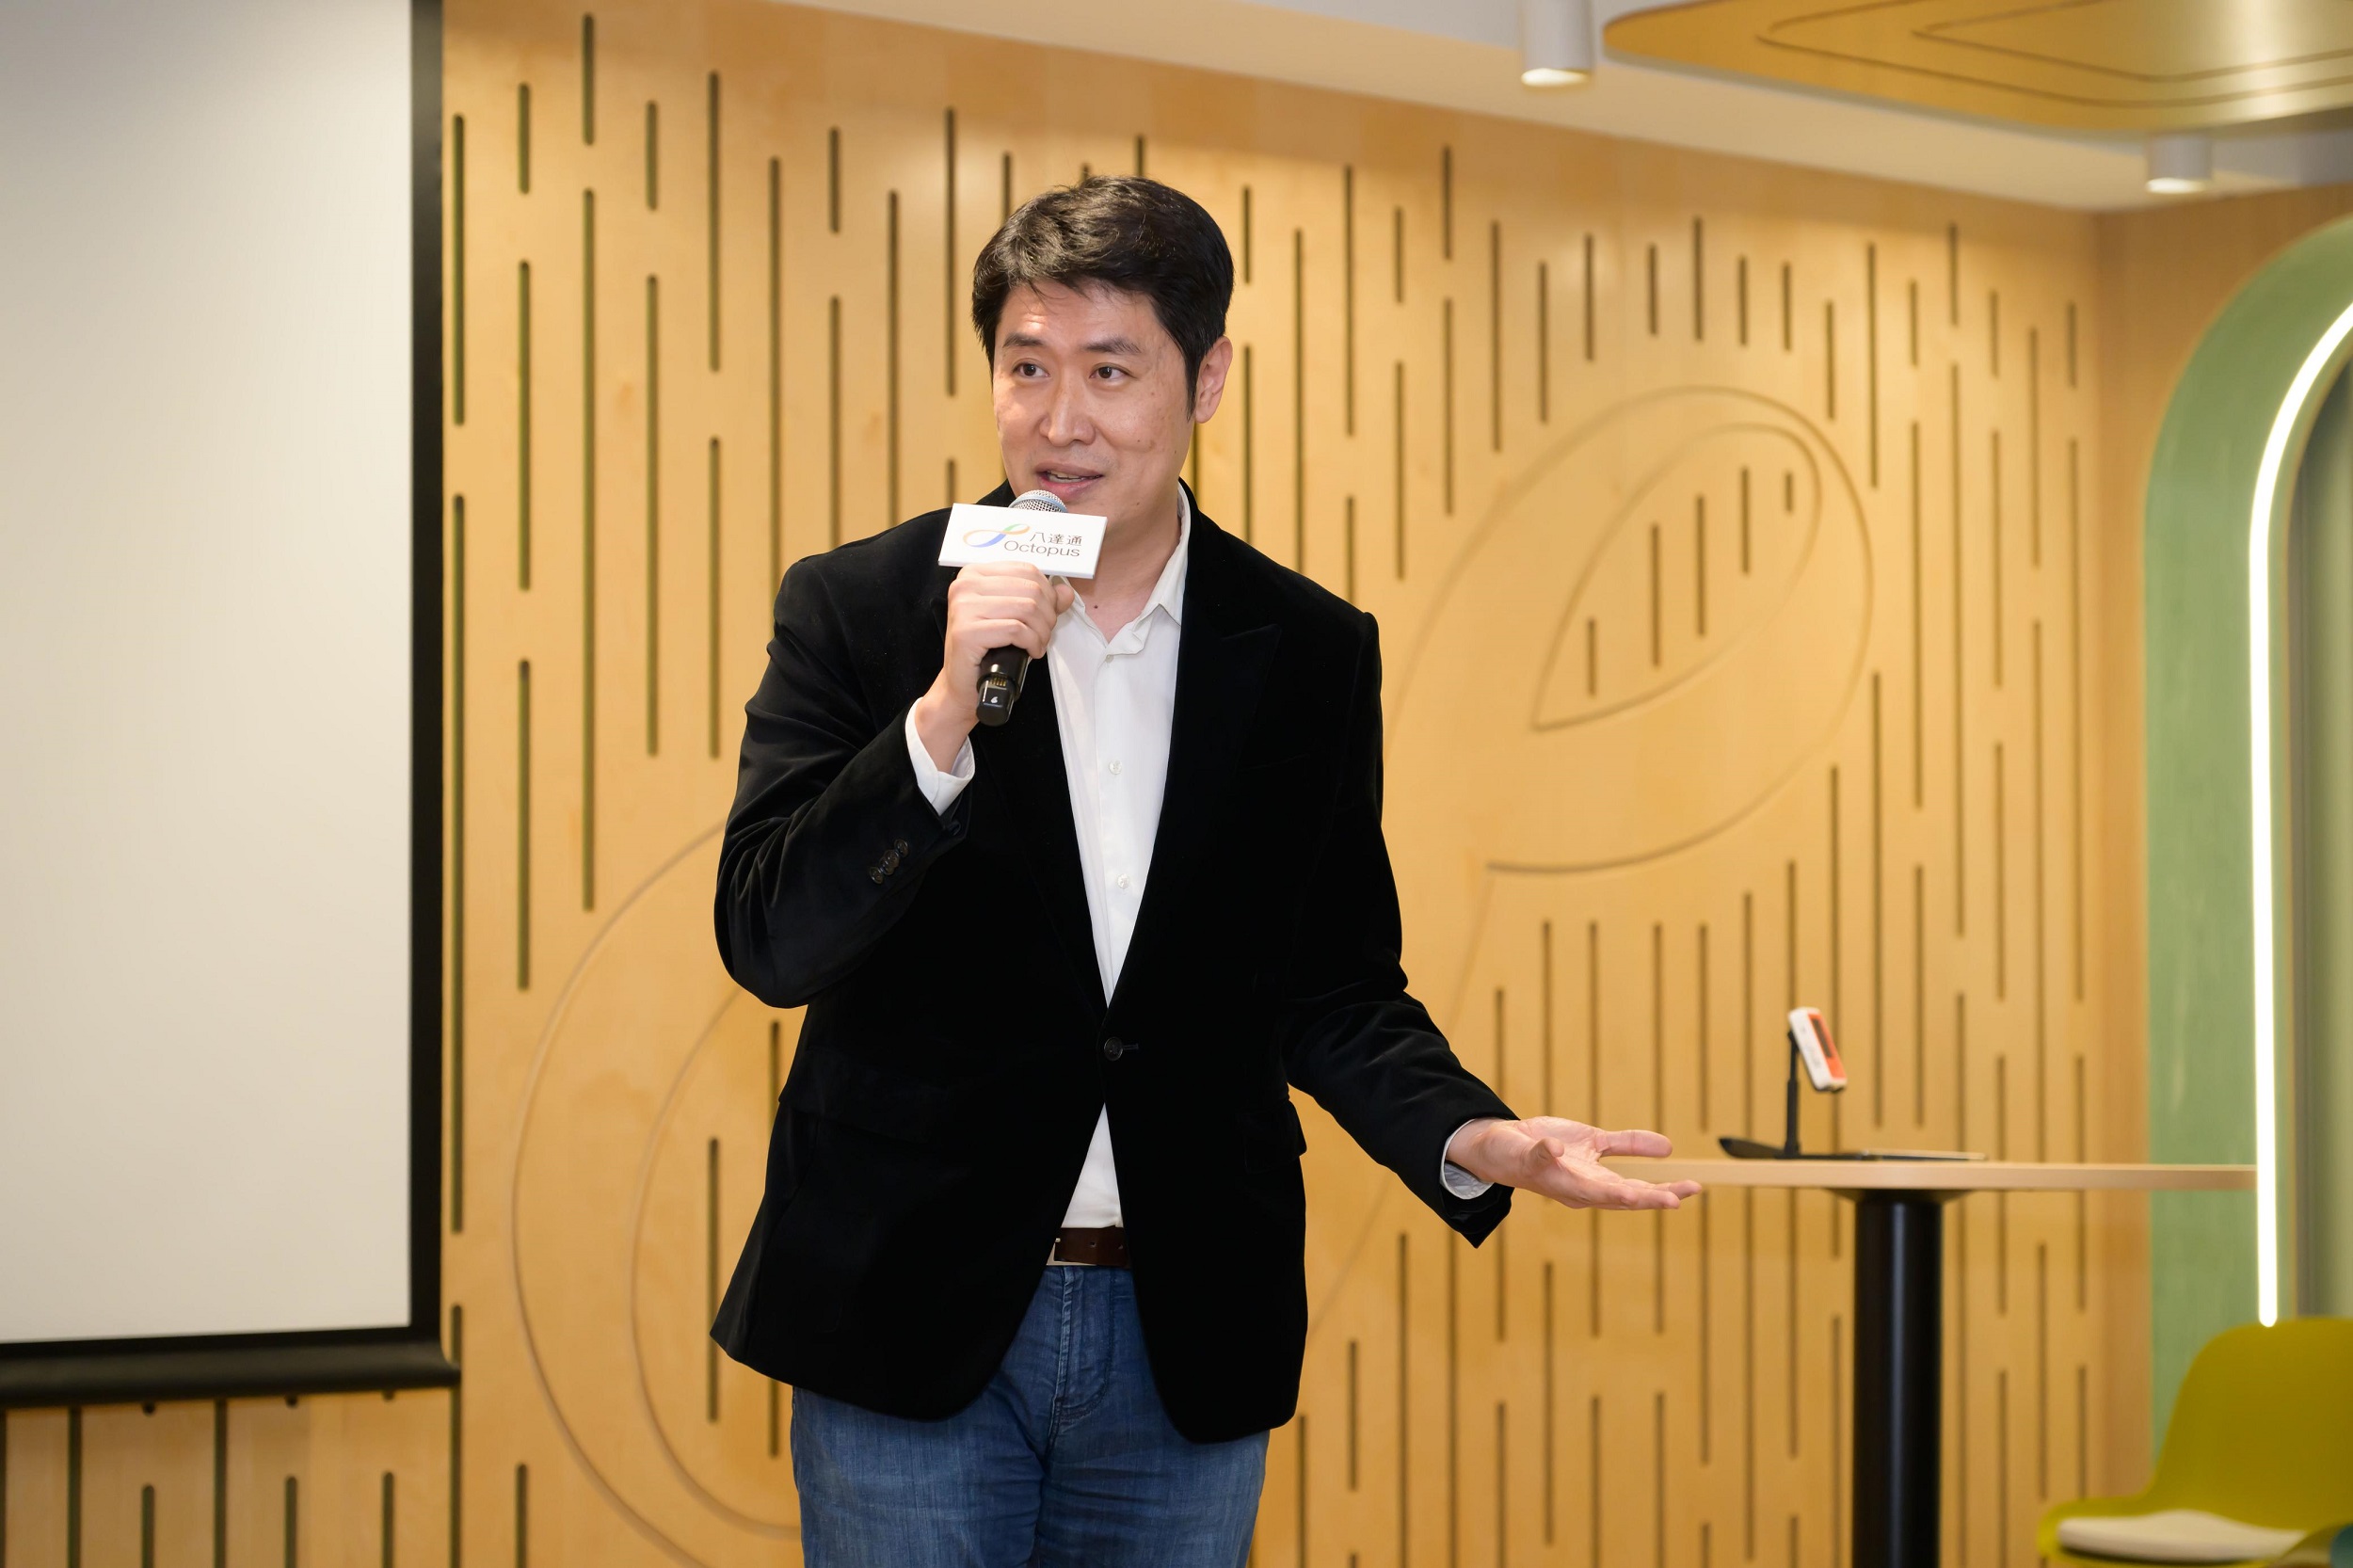 Tim Ying, Chief Executive Officer, Octopus Holdings Limited announced starting from 25 January, Octopus opens up its payment network to to other QR payments in Hong Kong’s taxi market.